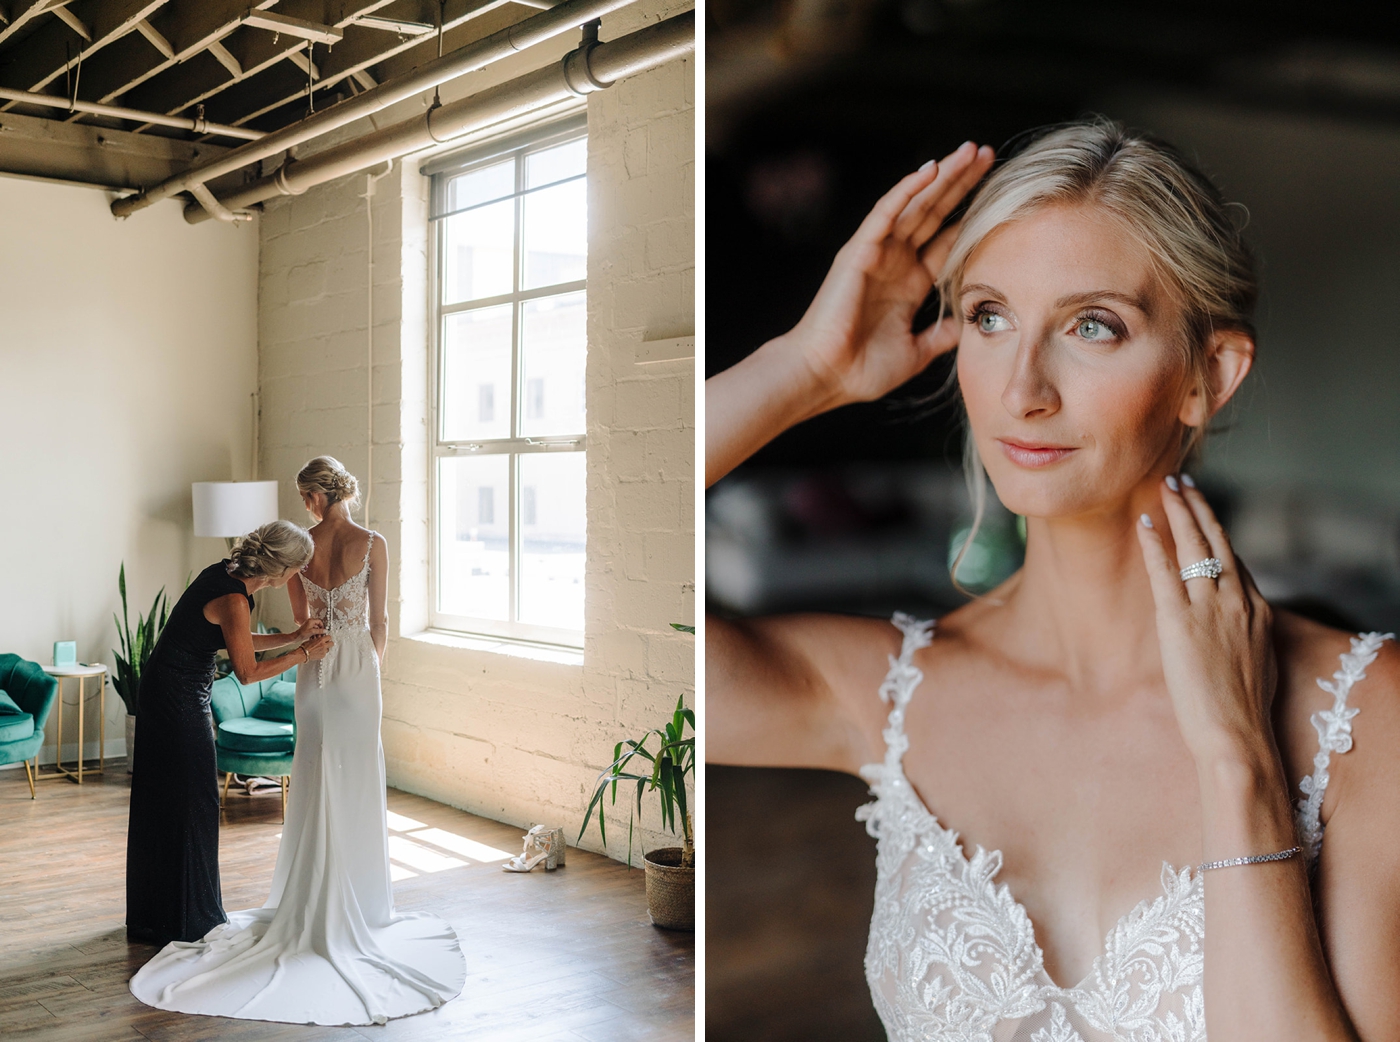 Bride in a sleeveless wedding gown with an A-line skirt and lace bodice from Two Hearts Bridal Shop